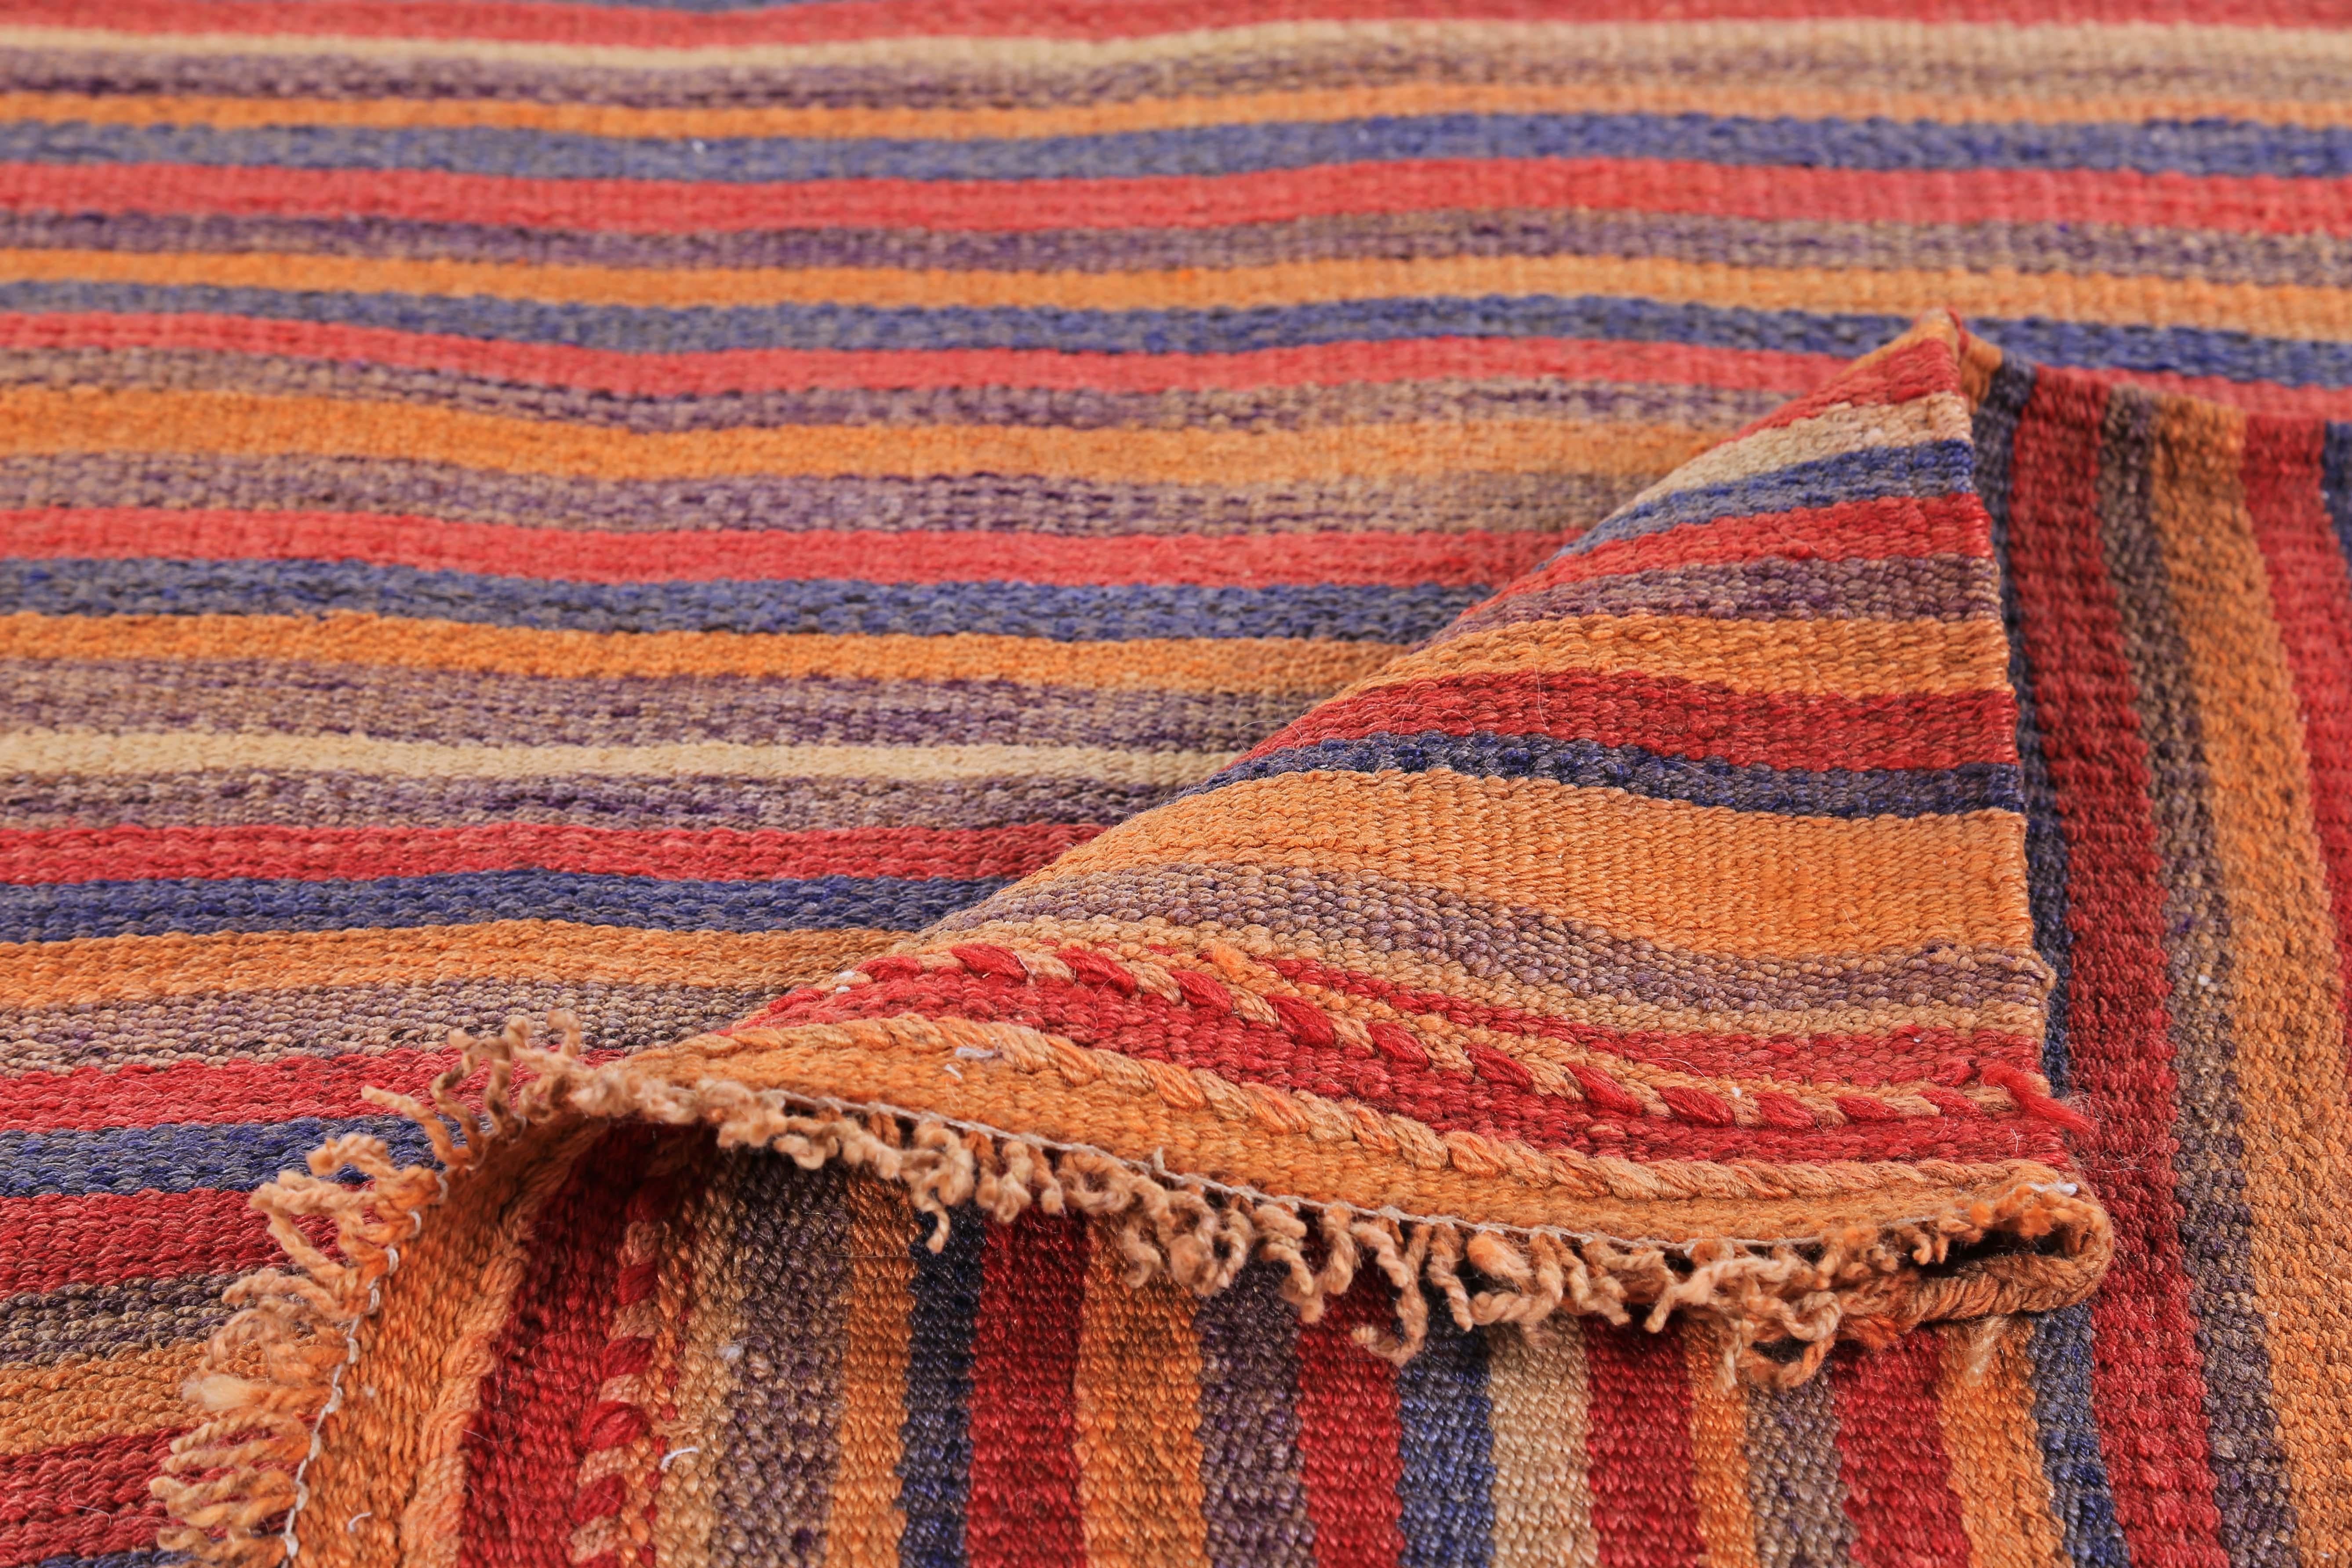 Hand-Woven Modern Turkish Kilim Rug with Red, Orange and Blue Stripes For Sale